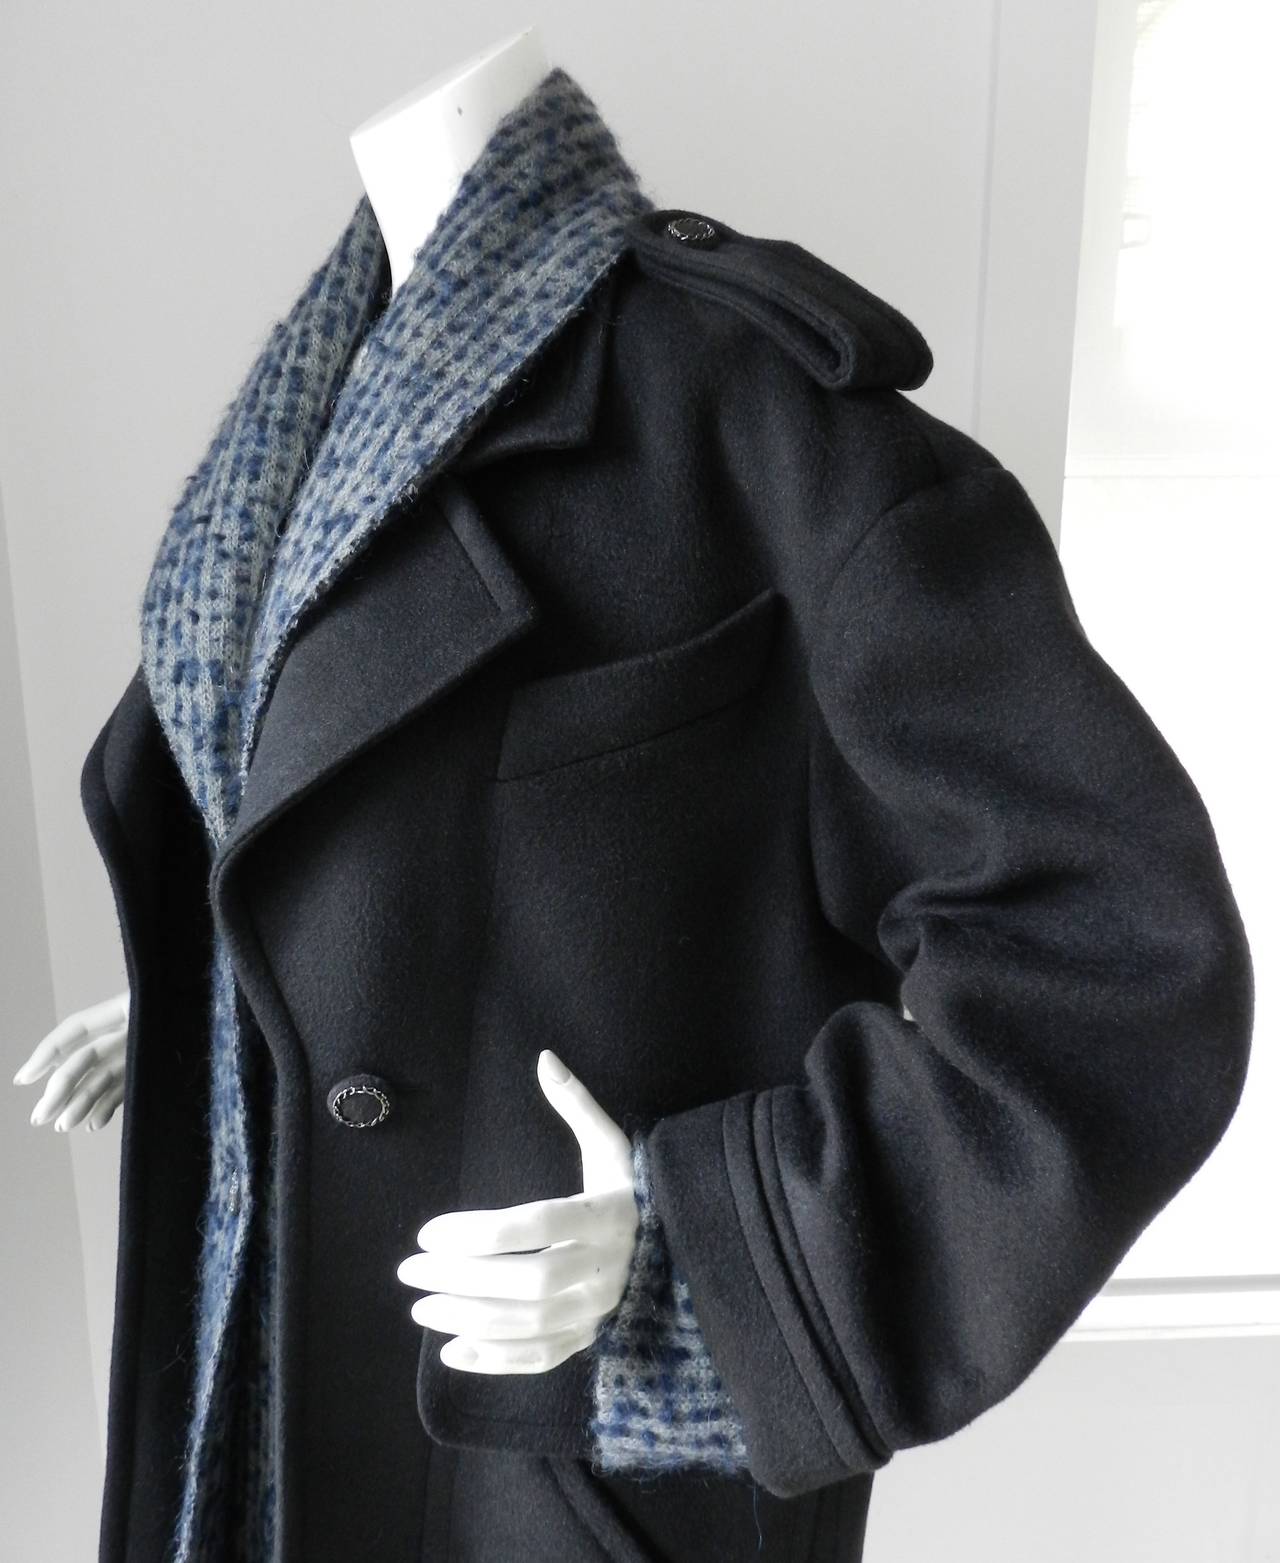 Chanel 2013B black silk (feels like cashmere) coat with grey/blue knit inset. Tagged size 38 (USA 6) with a loose oversized cut so can fit larger. Actual garment bust is 46